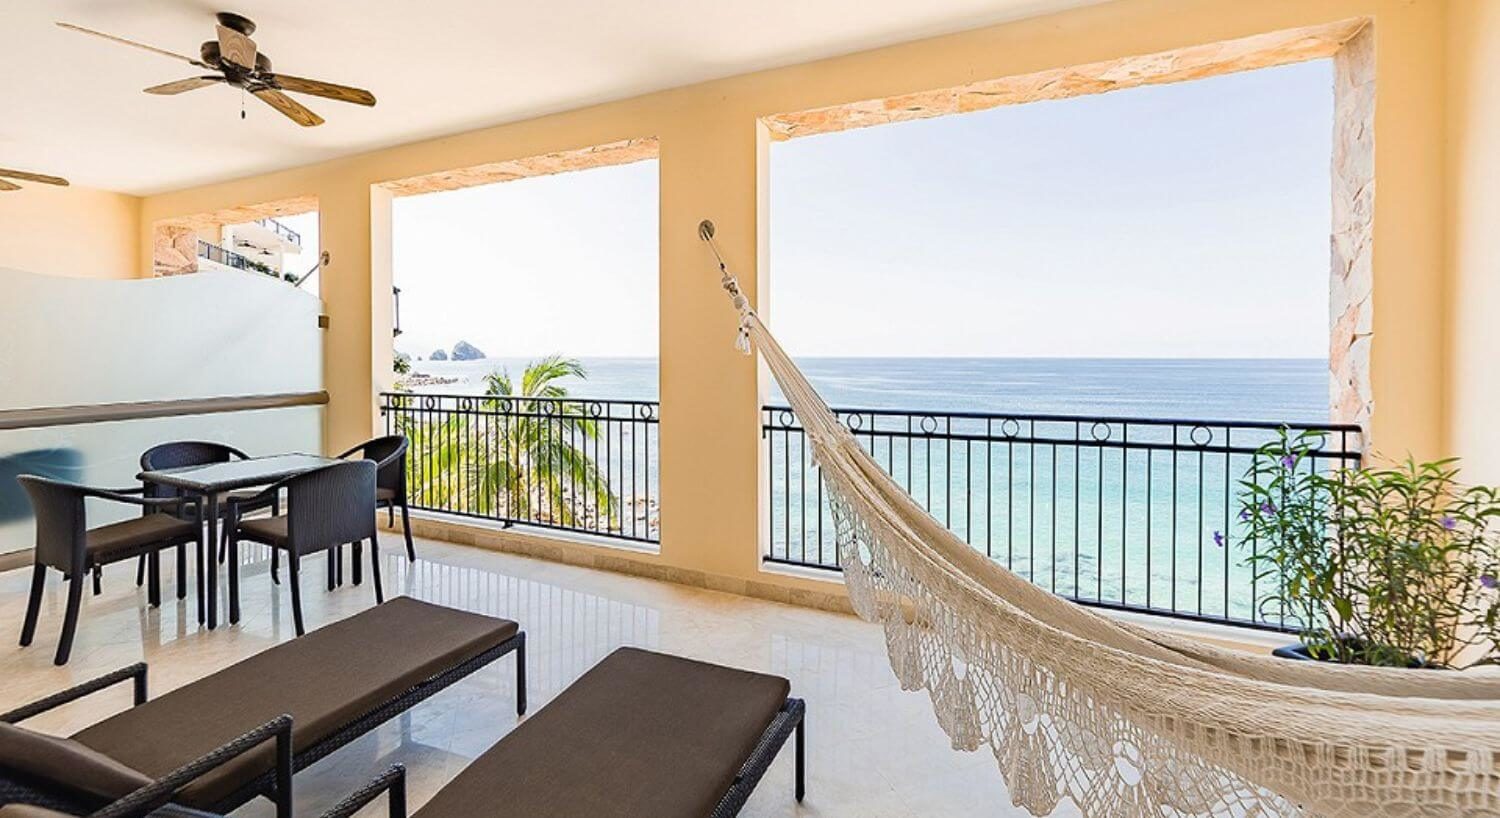 A private outdoor balcony with 2 brown lounge chairs, an outdoor dining table and chairs, a hammock, a wrought iron railing, and ocean views with the tops of palm trees popping up near the railing.